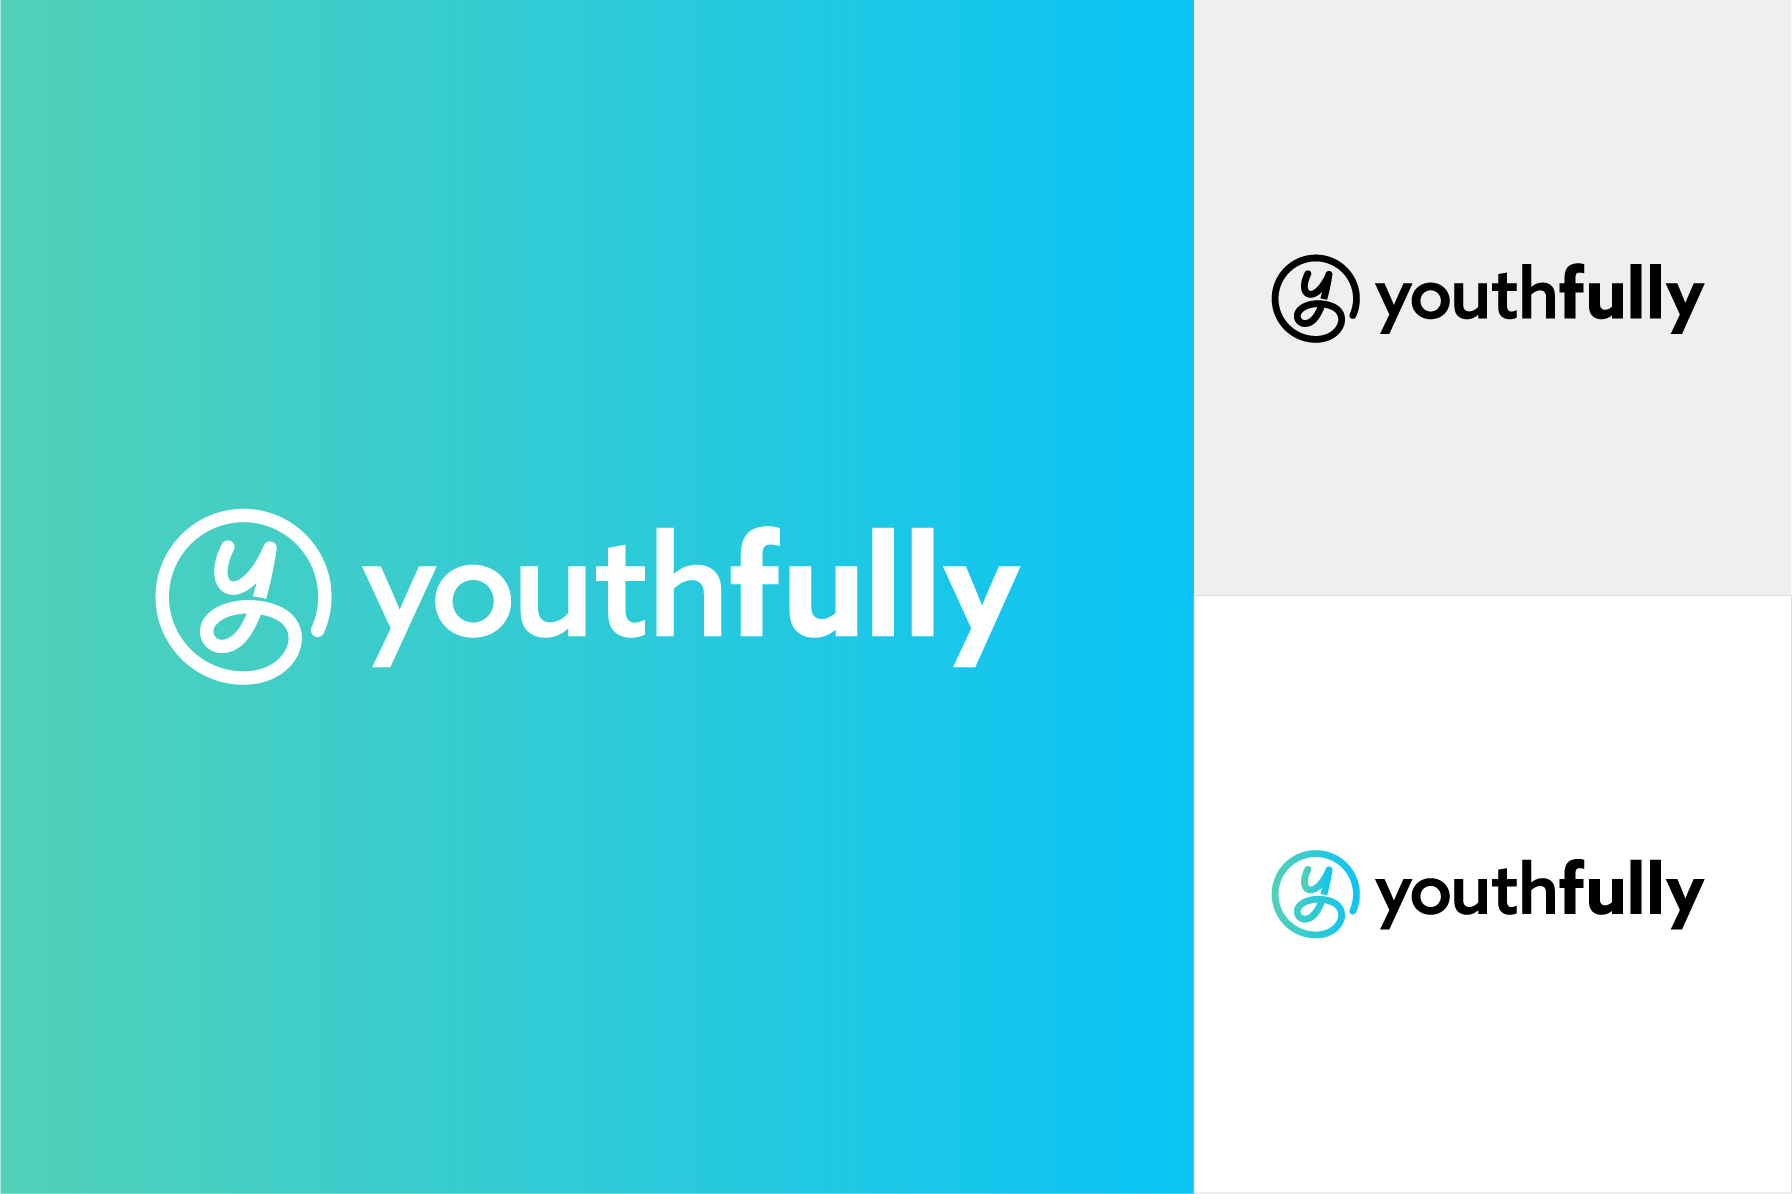 Logo variations for Youthfully: the letter 'Y' in a circle with the wordmark.